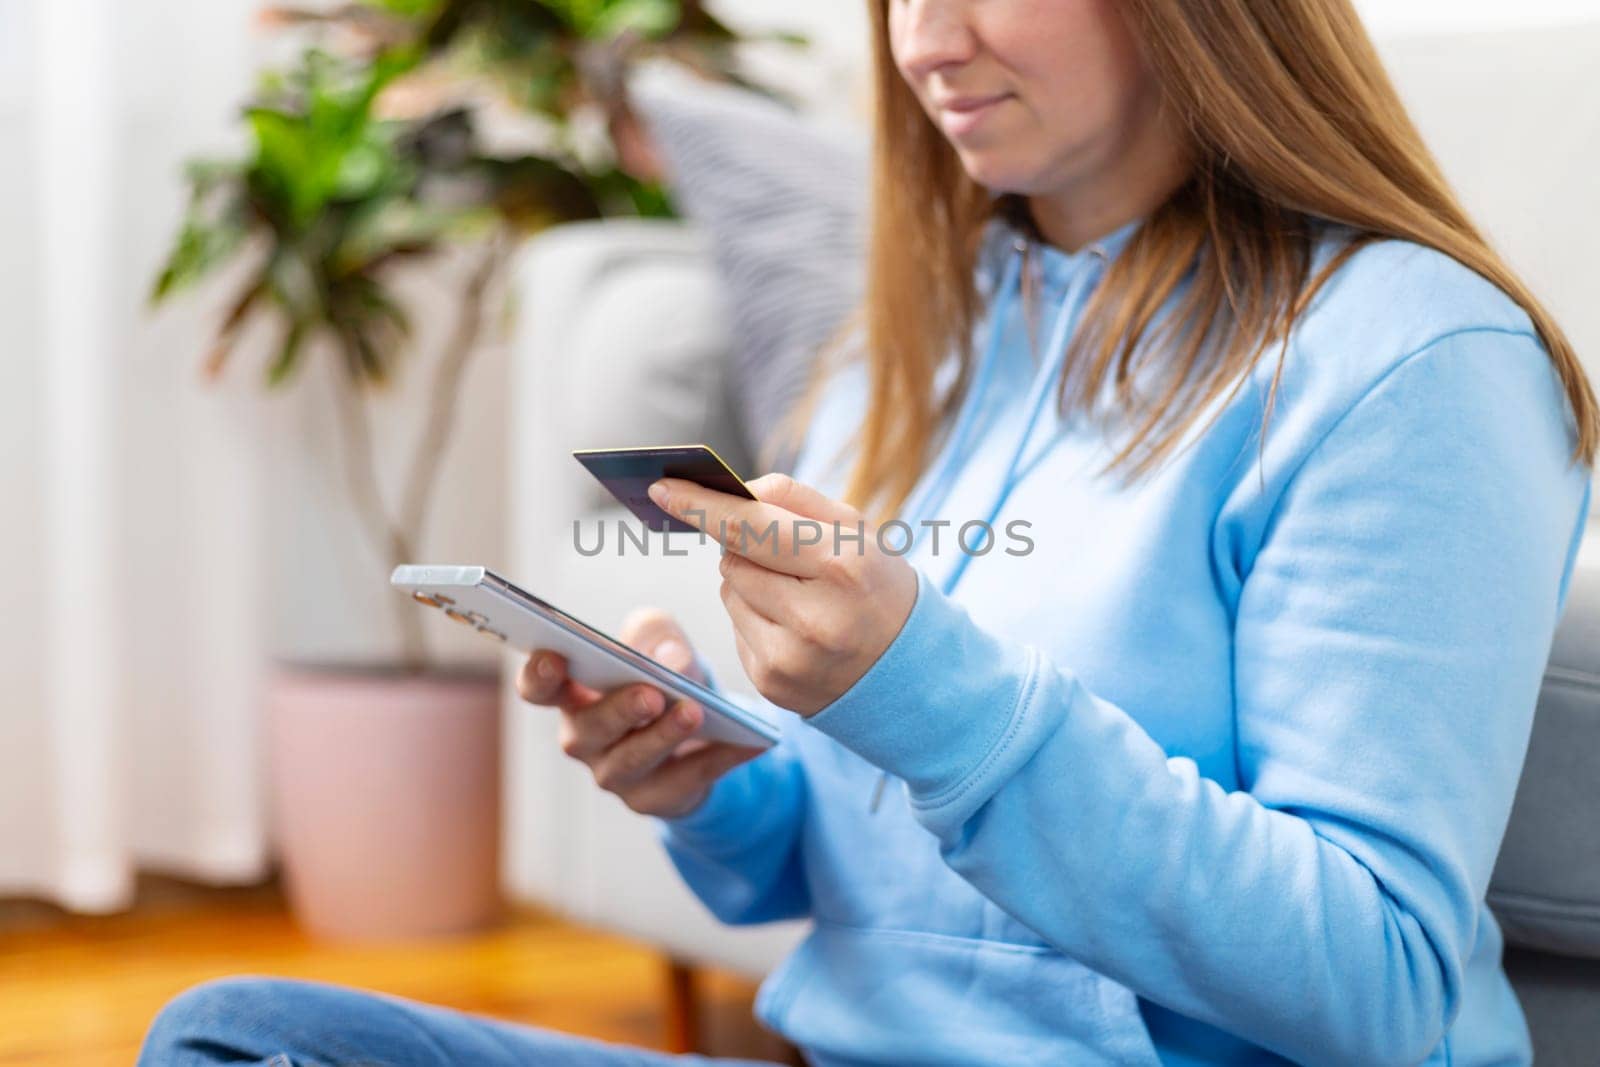 Focused woman using smartphone and credit card for online shopping, sitting on a couch at home.